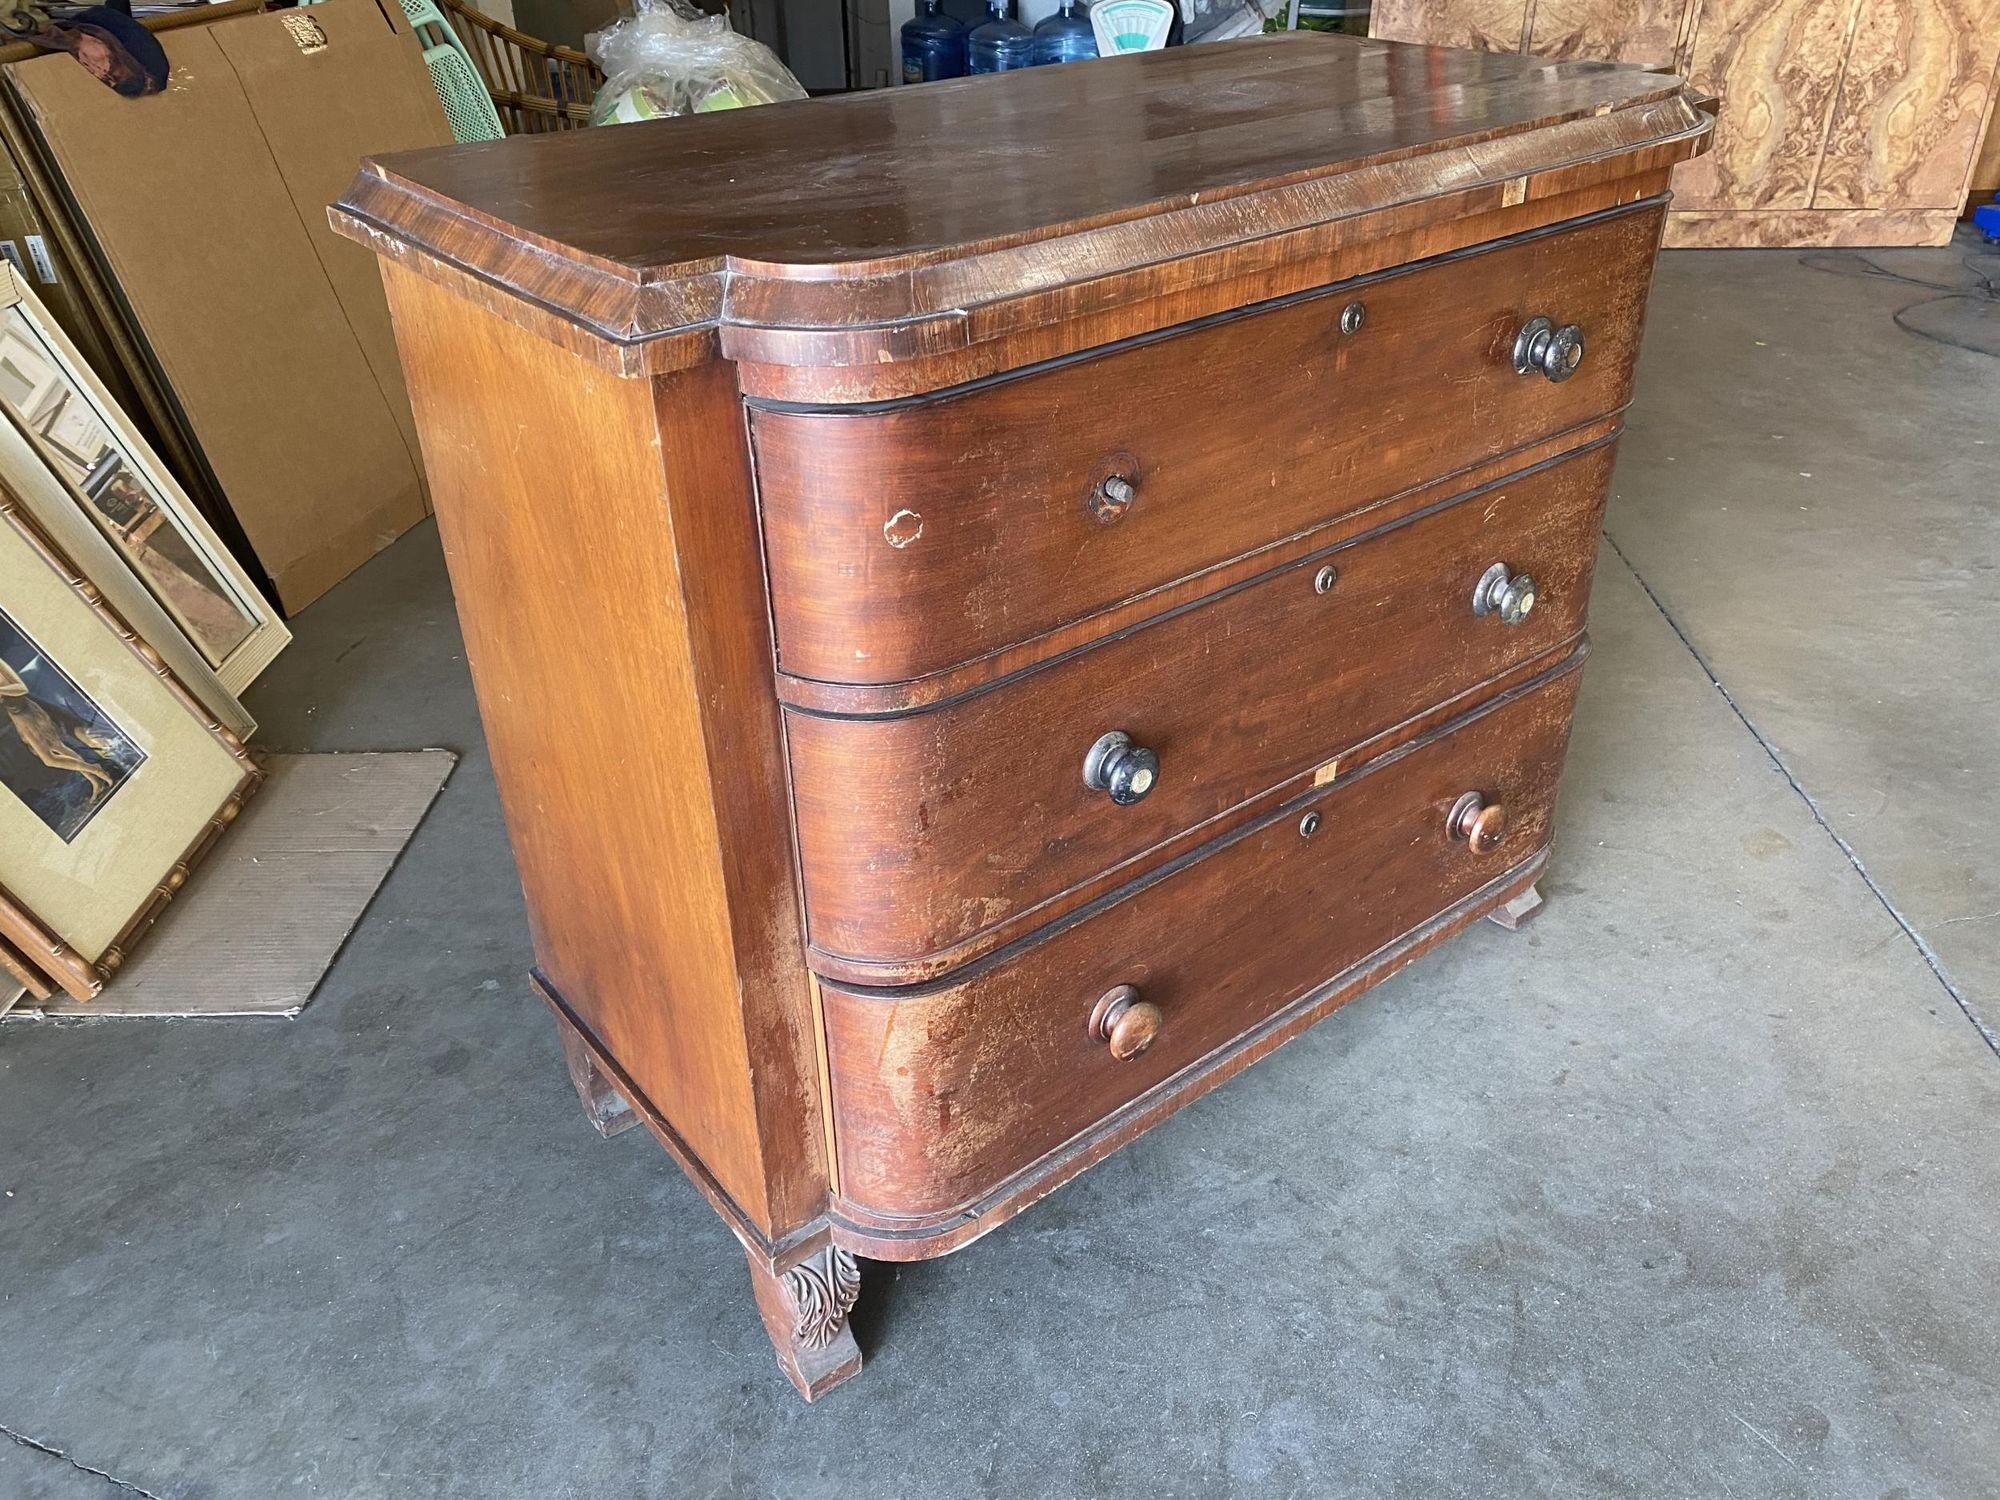 Late Victorian Queen Anne lowboy dresser featuring a sculpted front with 3 oversized drawers.